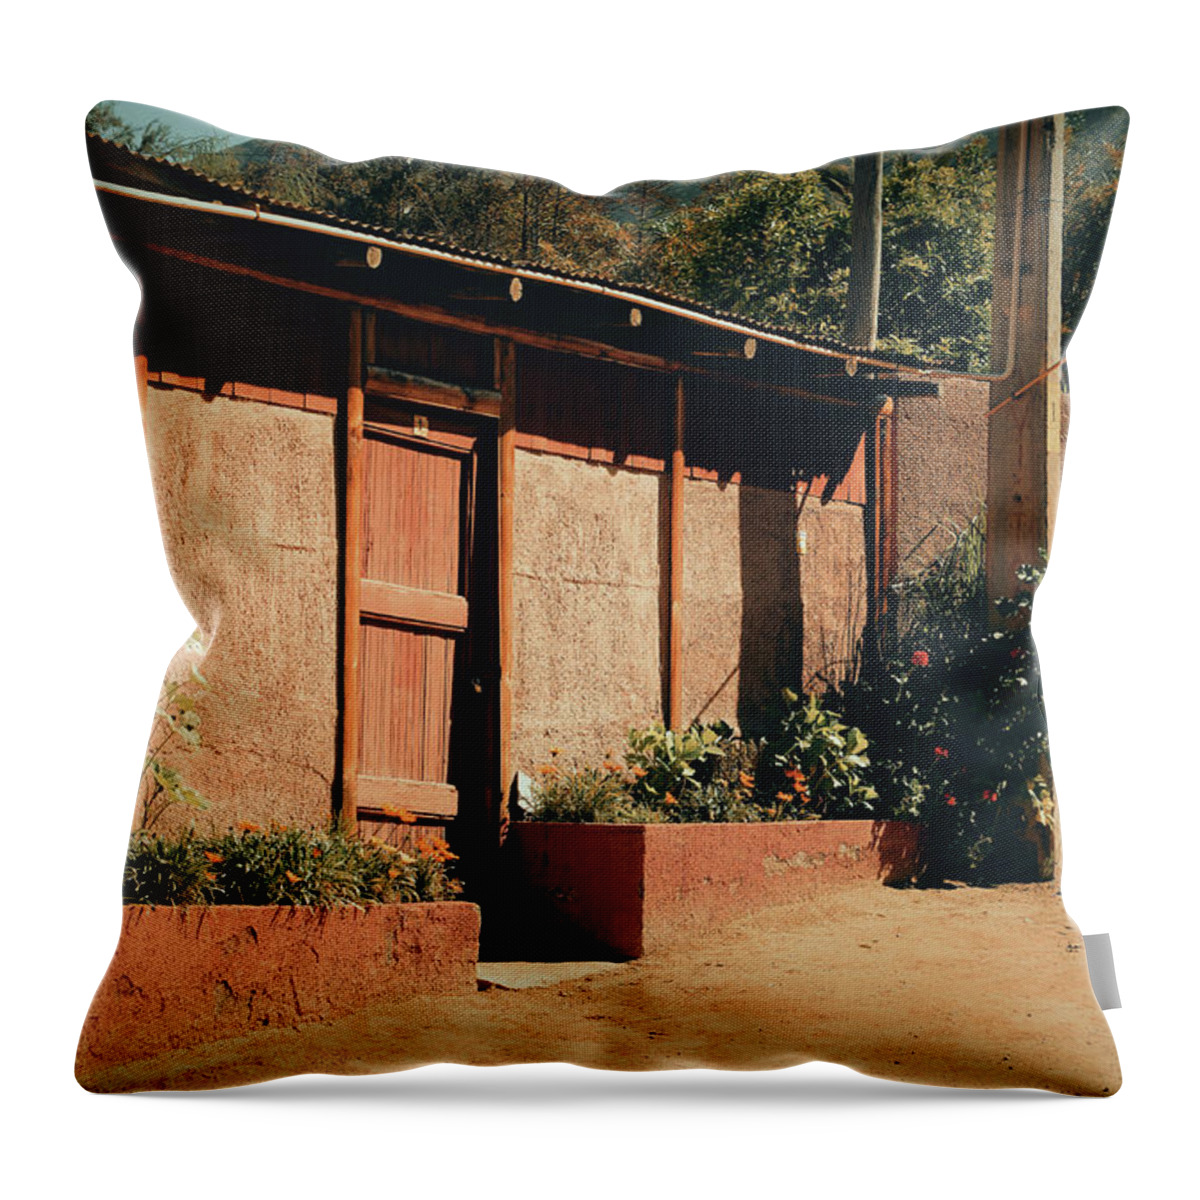 Elqui Valley Throw Pillow featuring the photograph Elqui Valley - Chile by Maria Angelica Maira